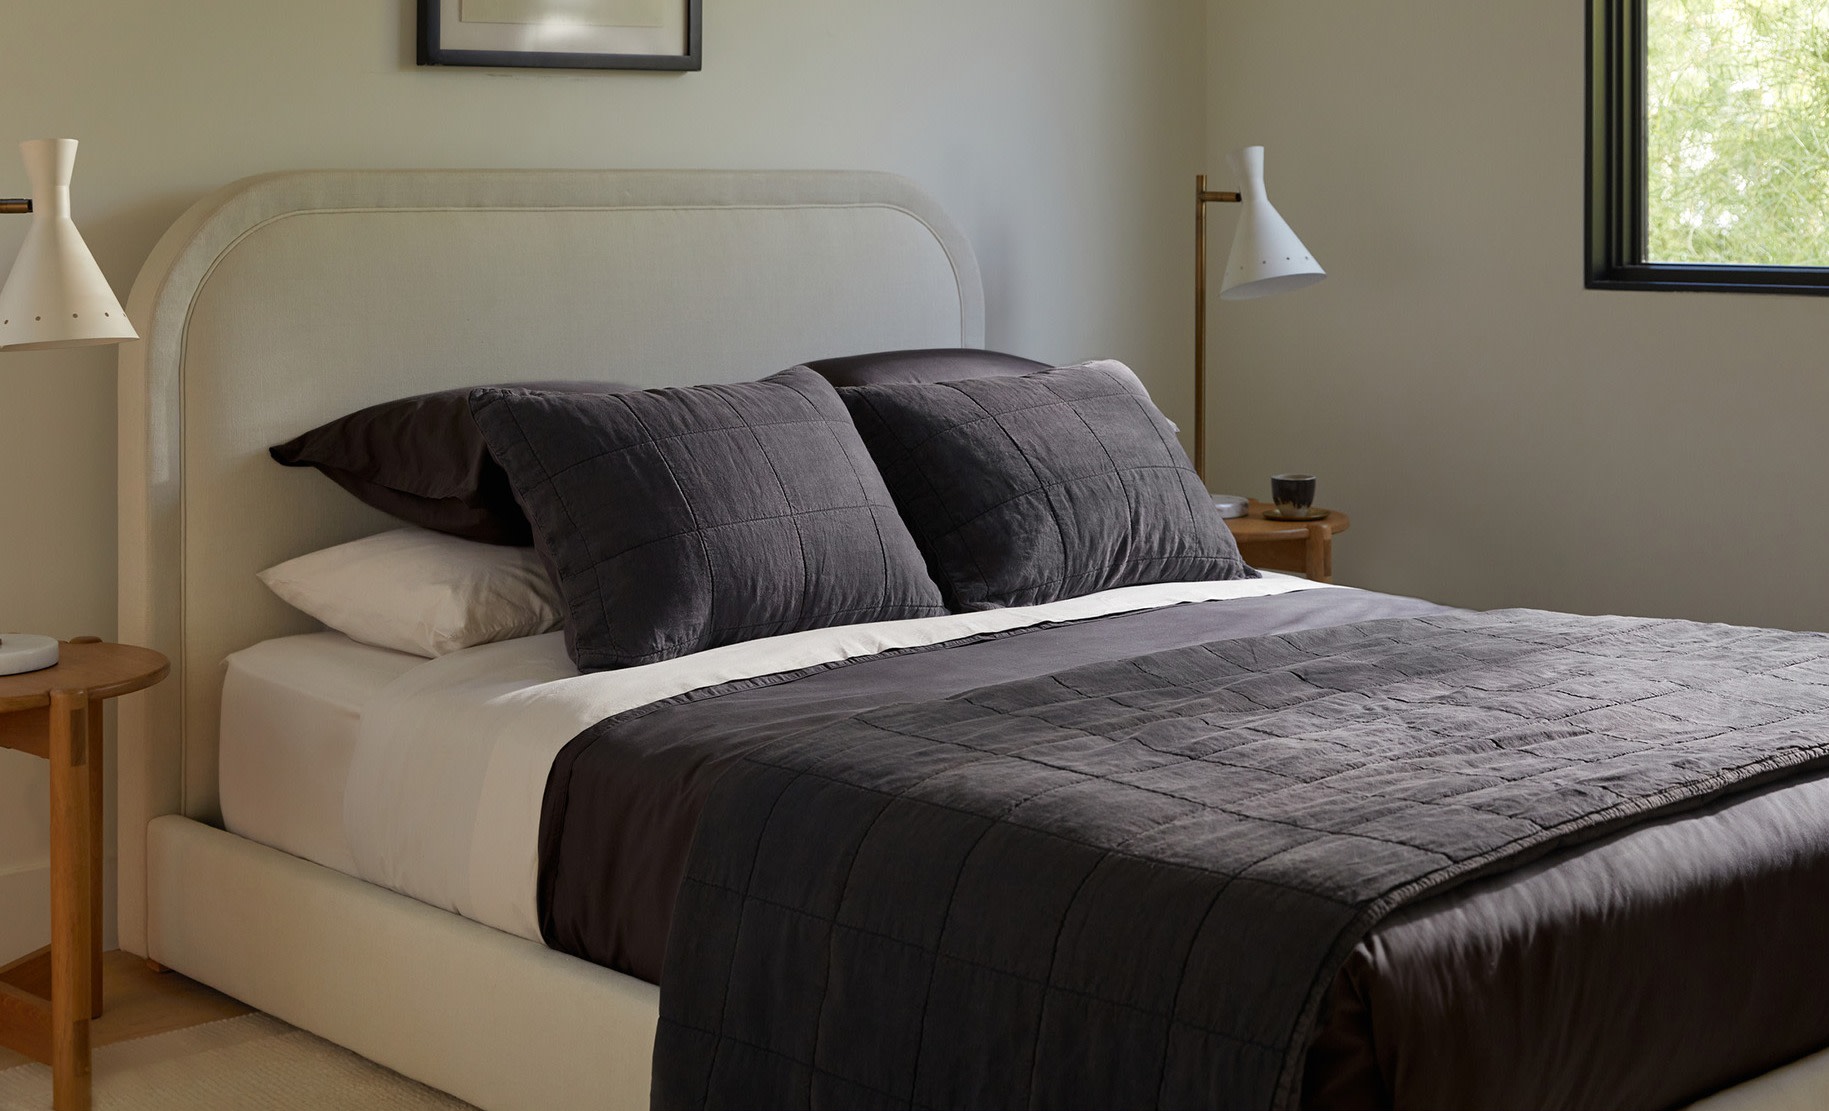 A curved bed frame with dark grey linen sheets